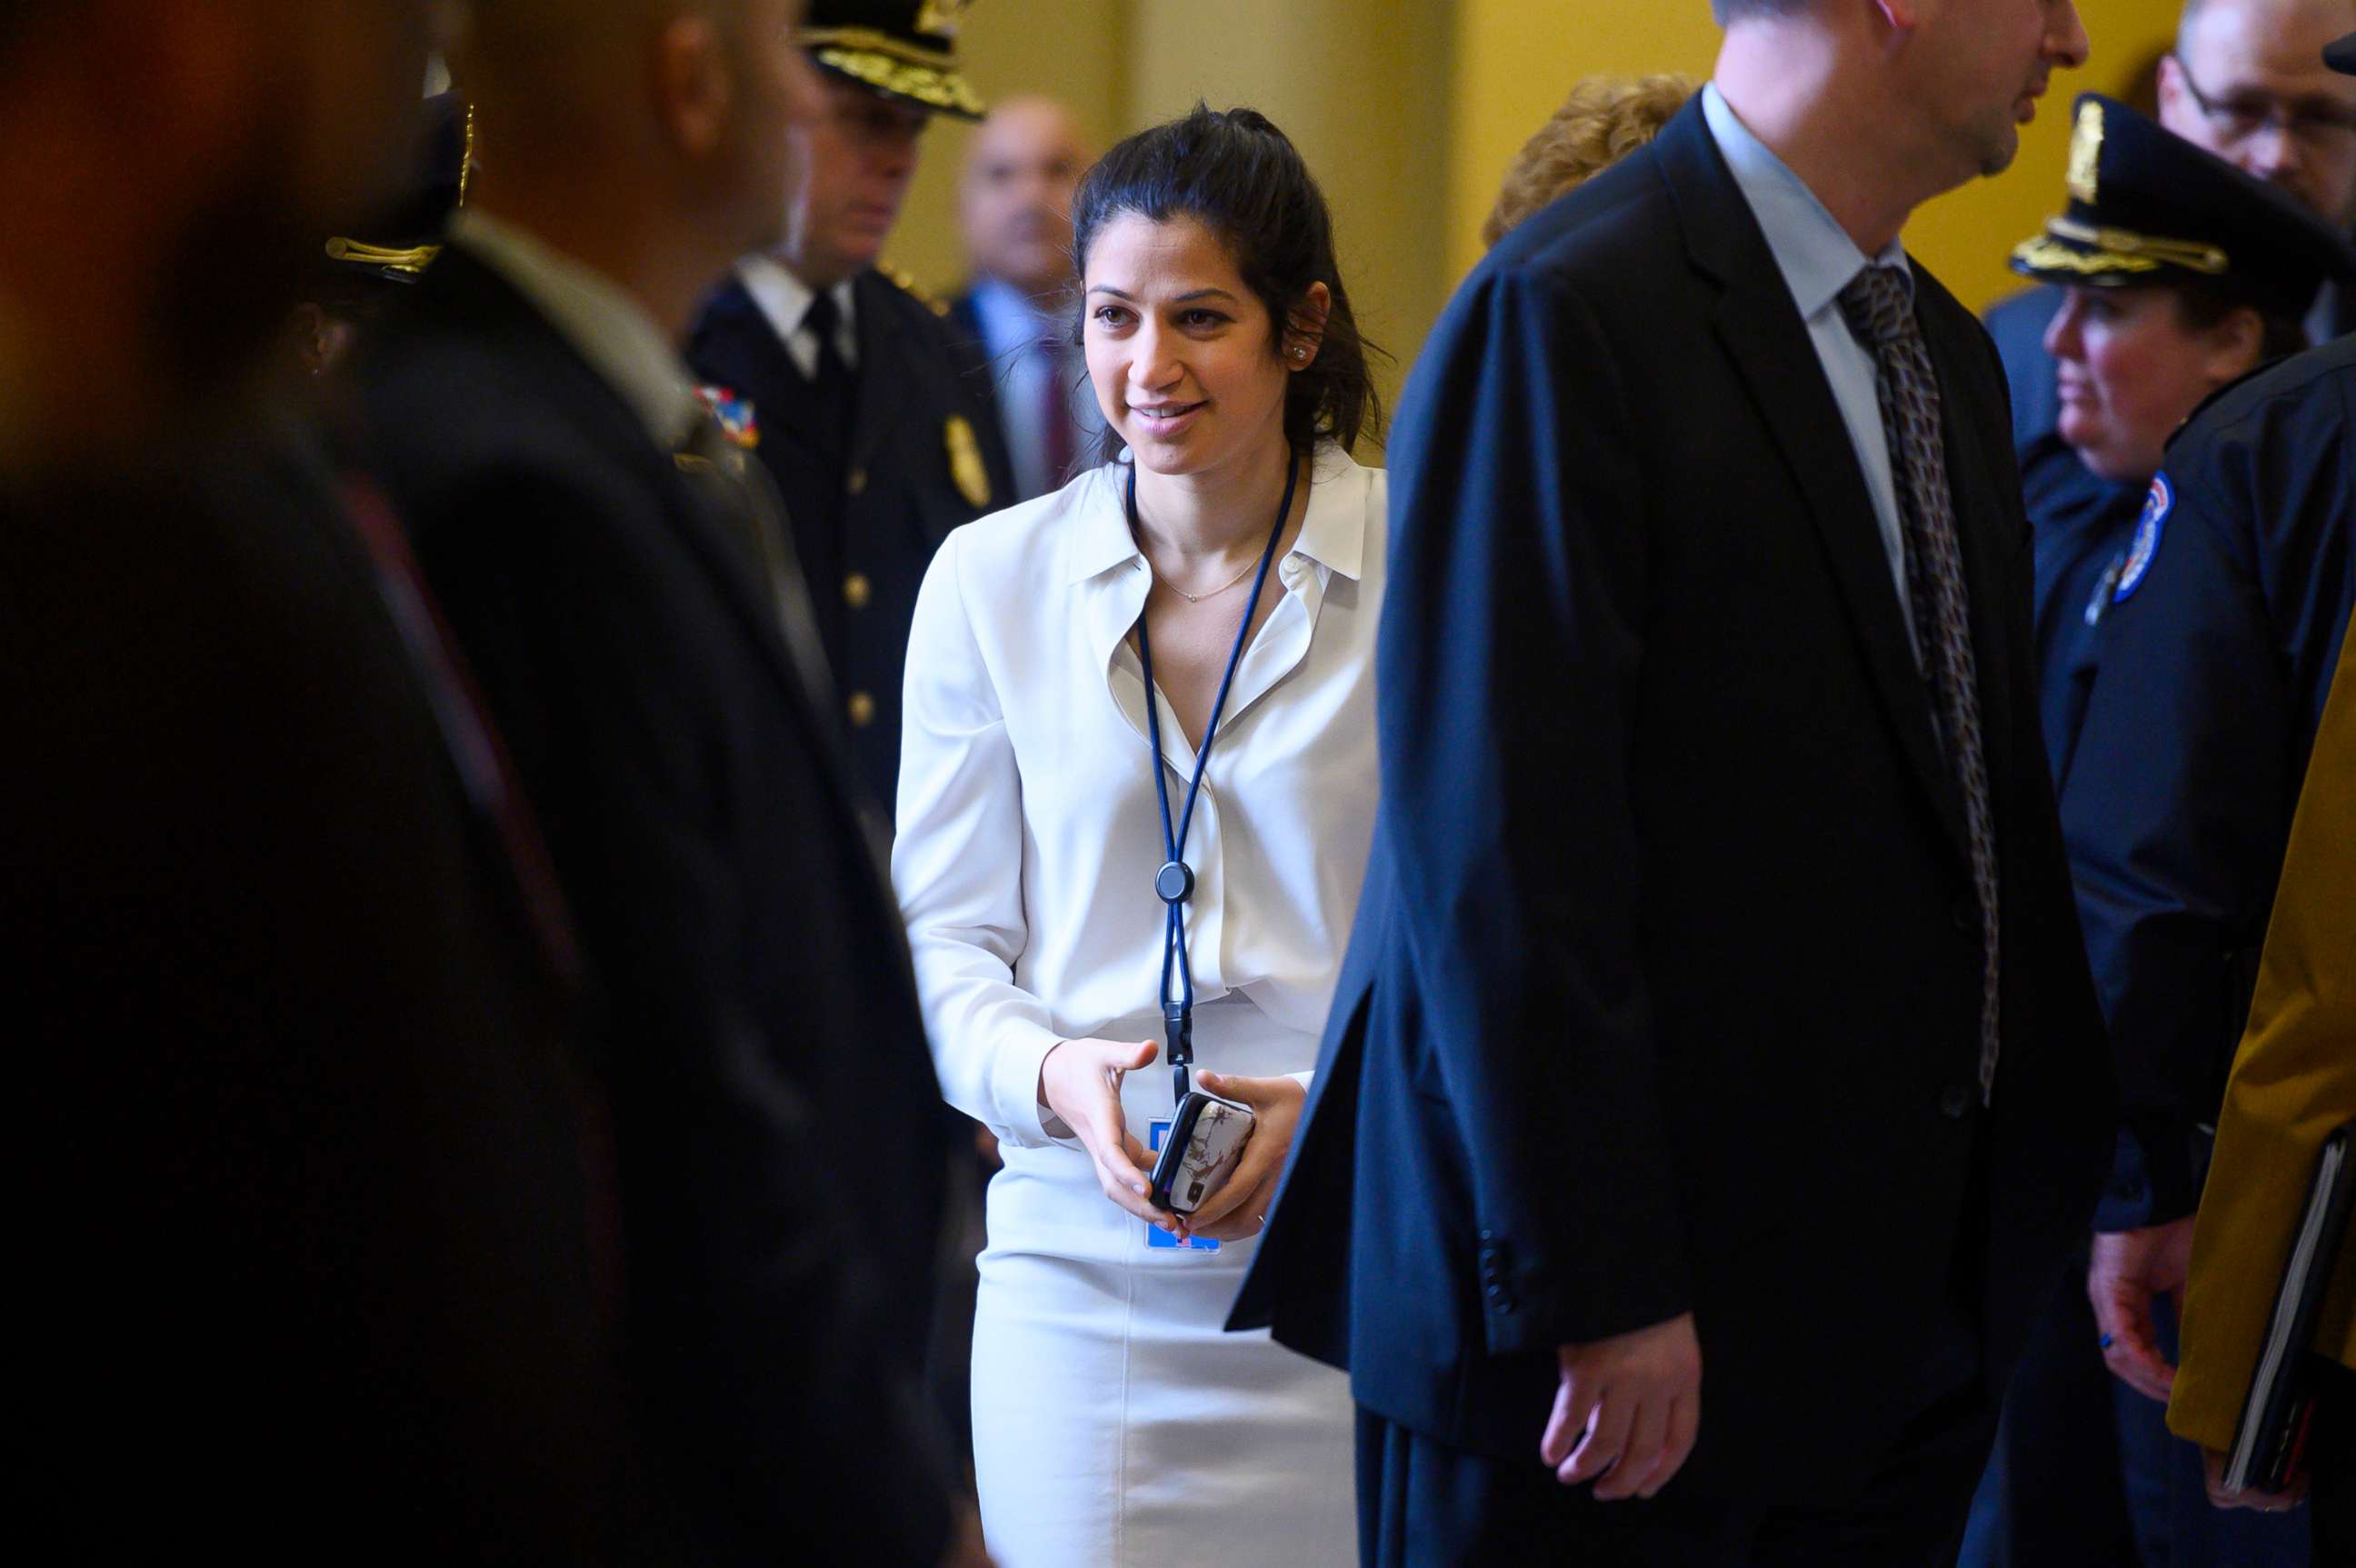 PHOTO: Katie Waldman, press secretary for Vice President Mike Pence, is seen in the Capitol during the Senate Policy luncheons in the Capitol, February 11, 2020.